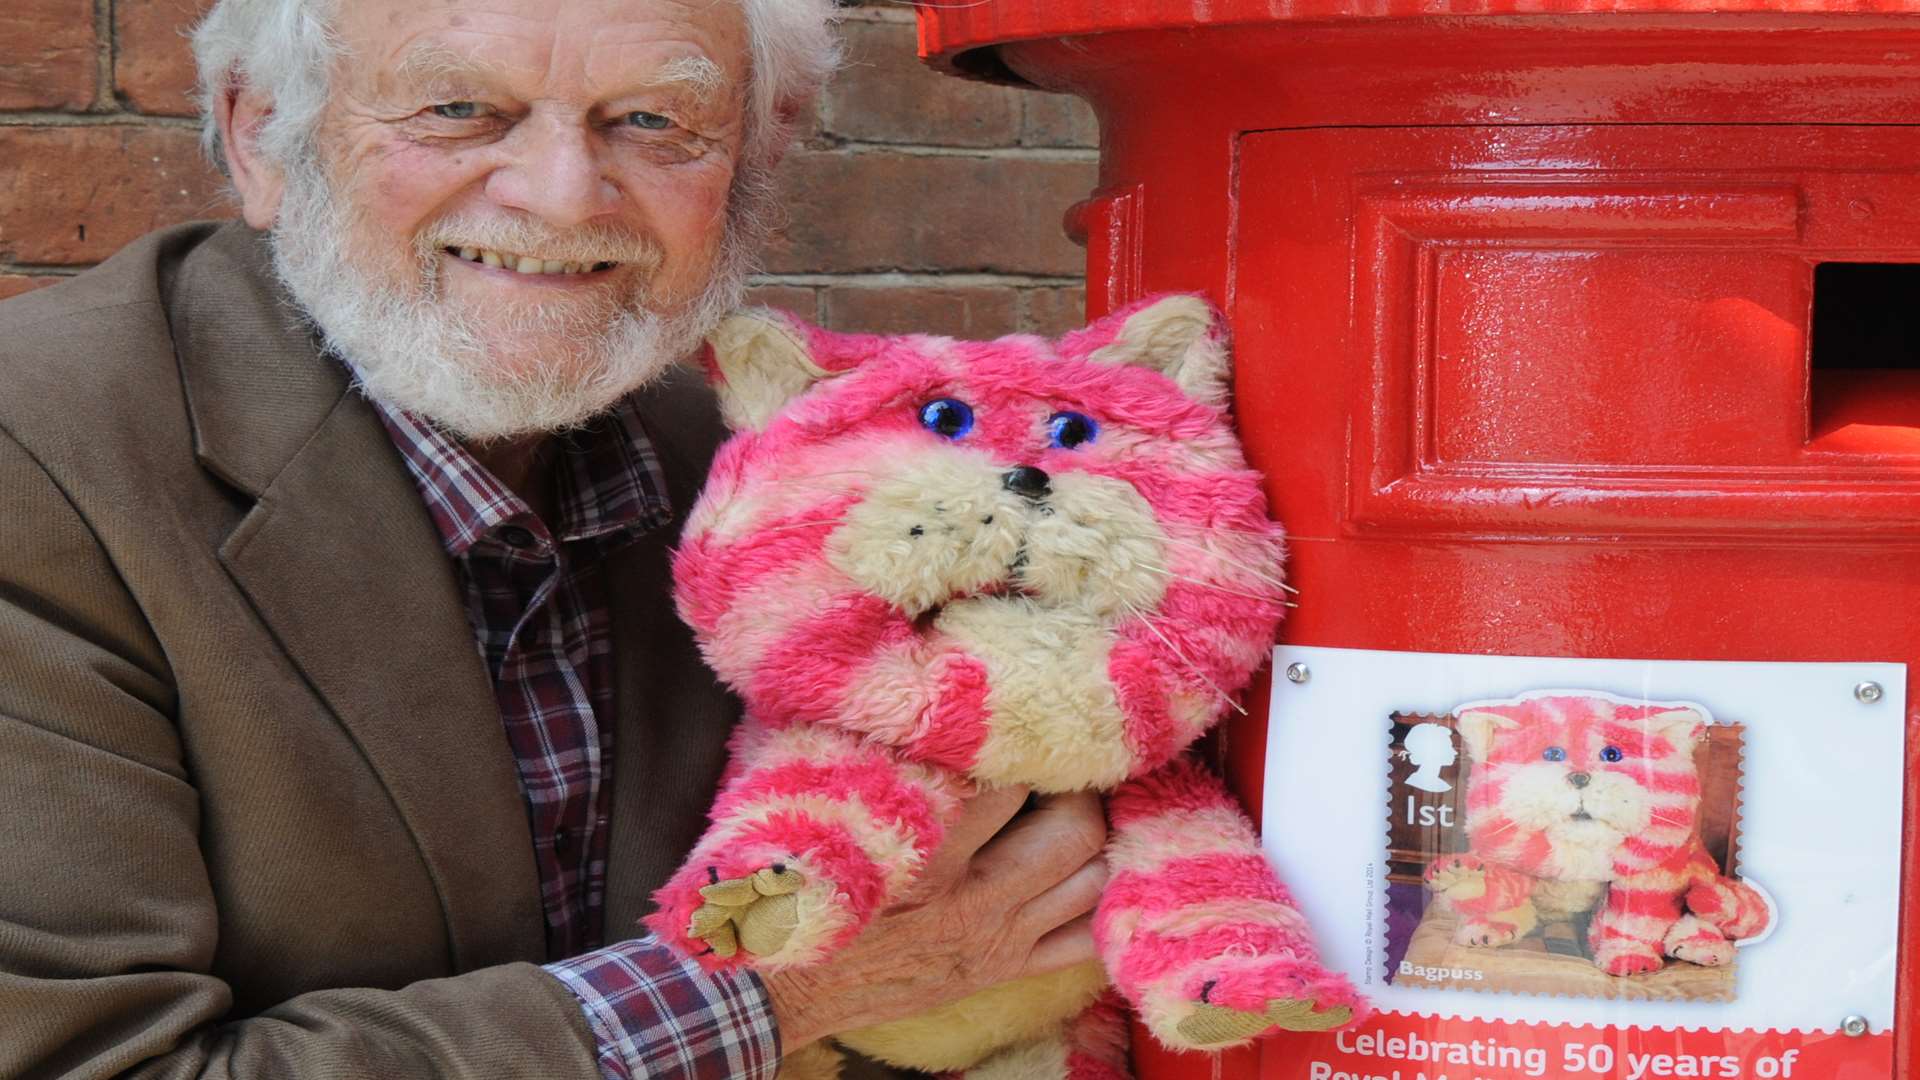 Legendary animator Peter Firmin unveils the Bagpuss postage stamp